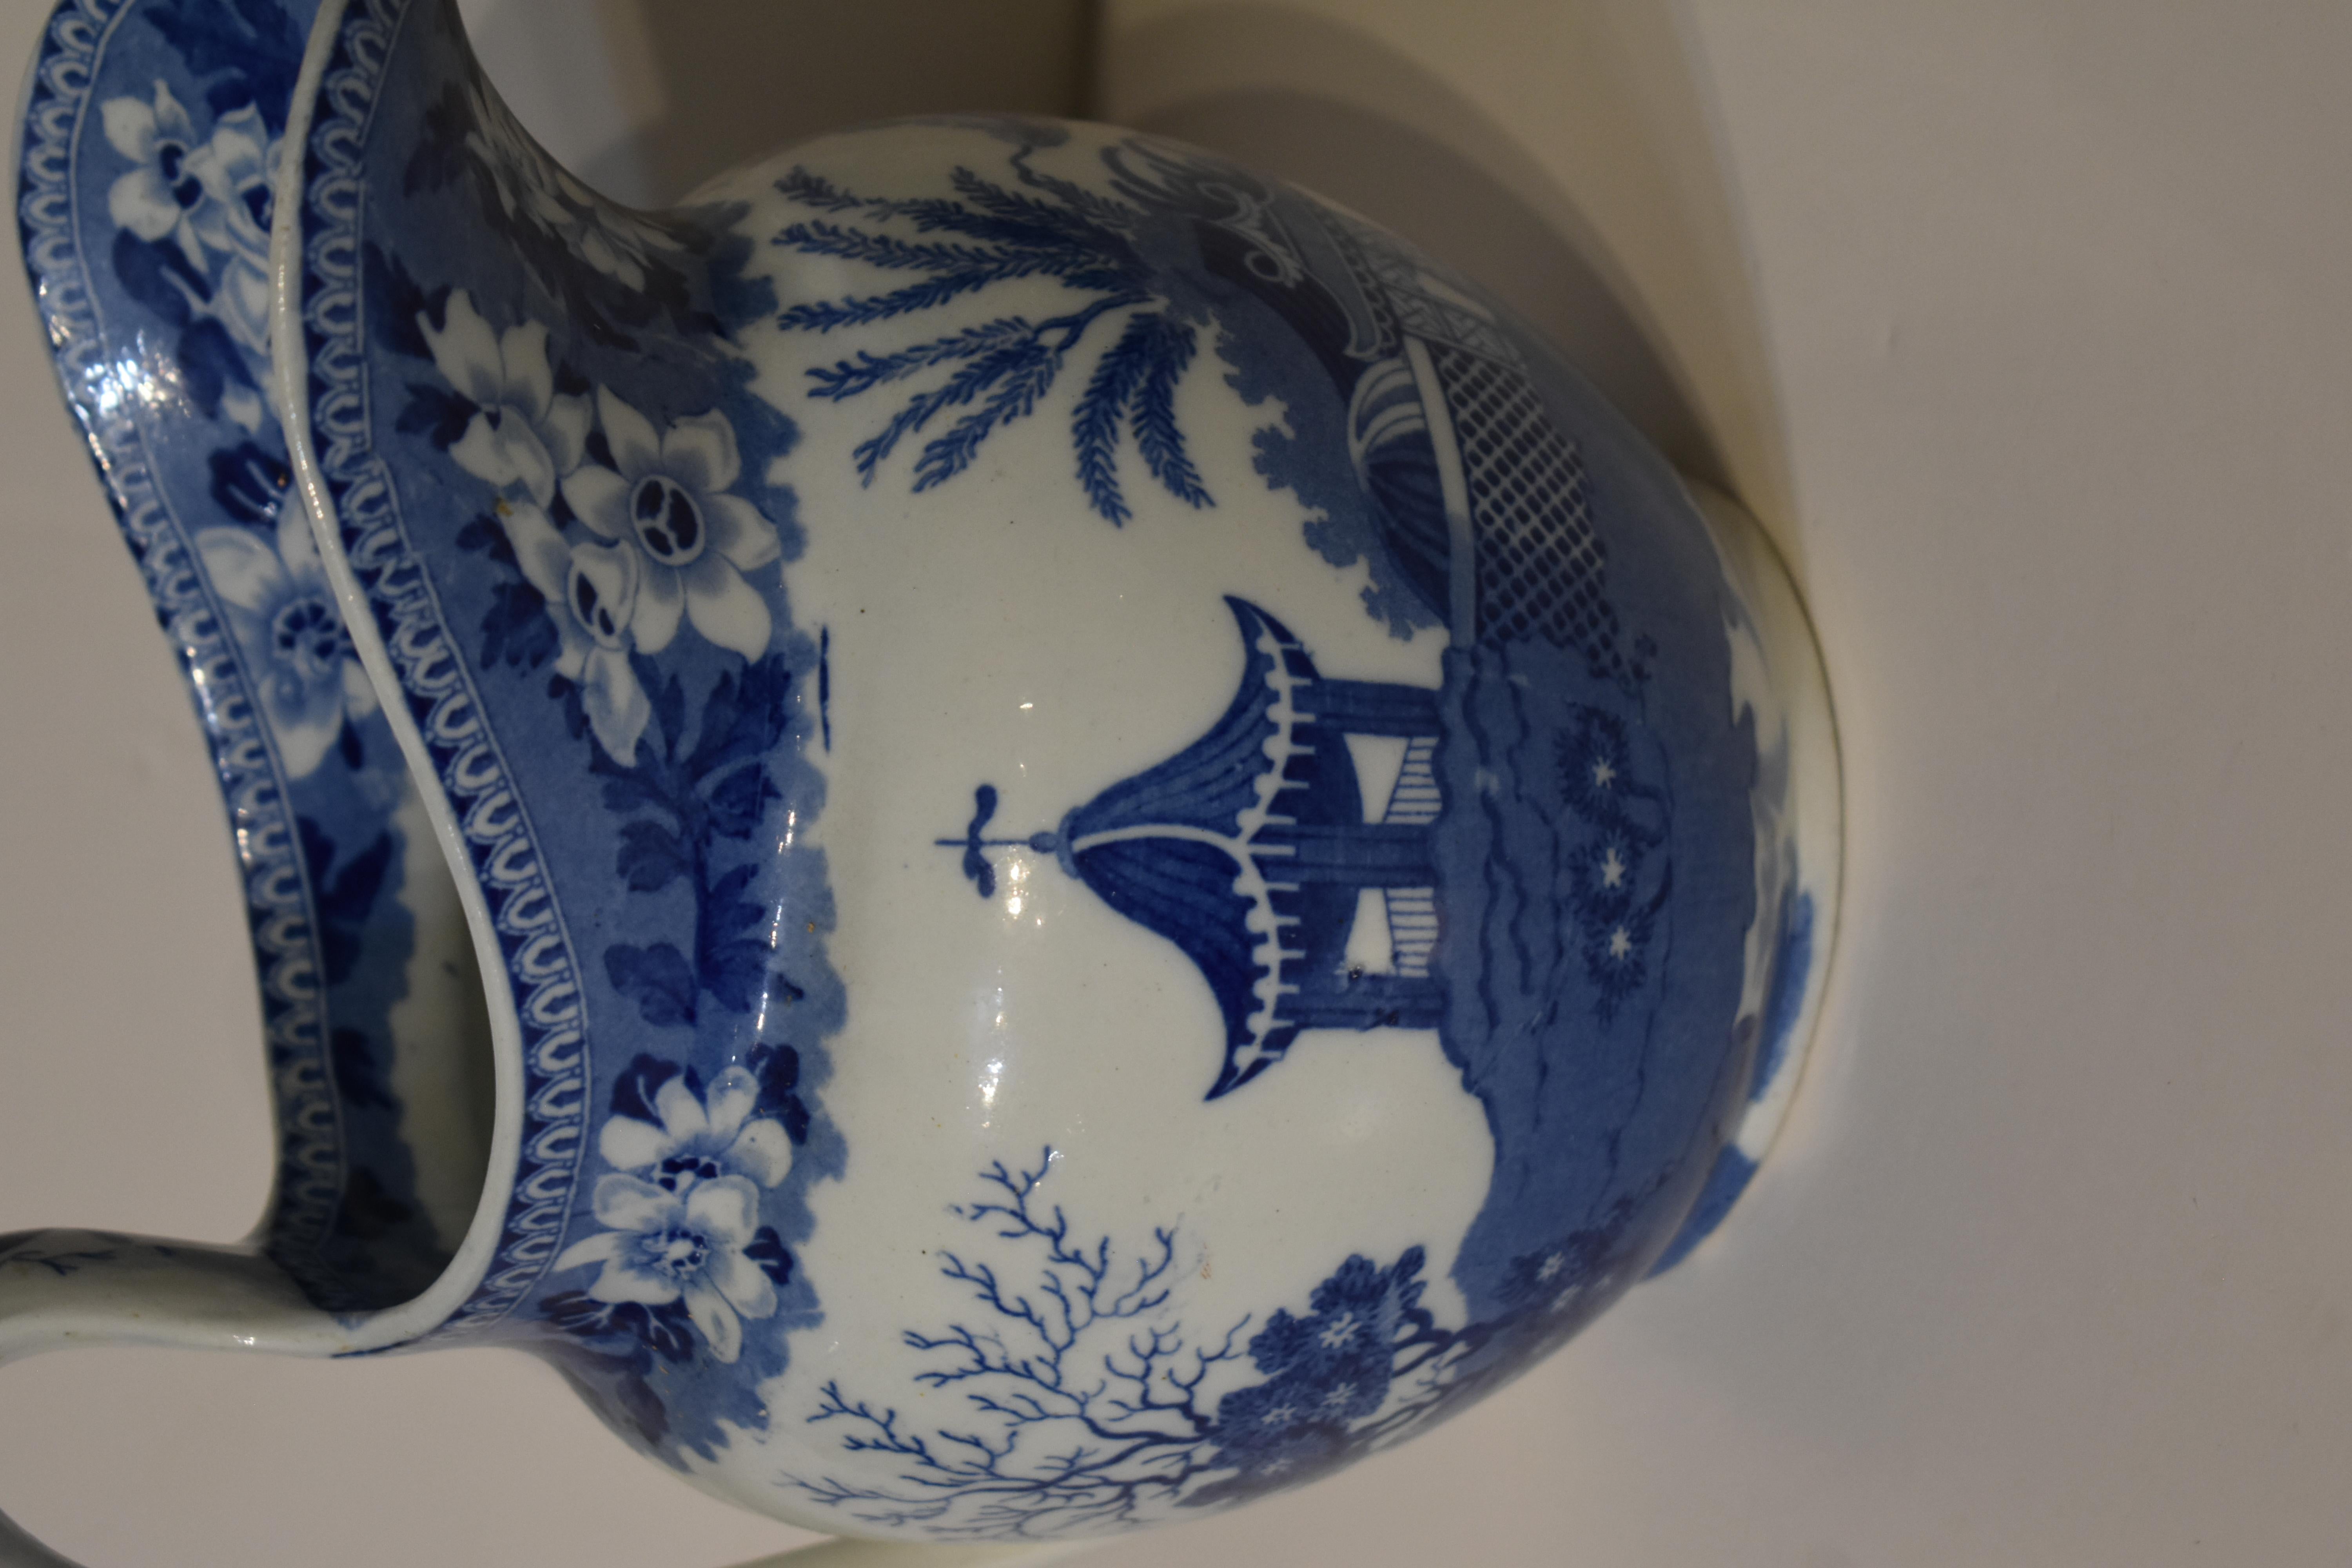 European Historical Staffordshire Blue and White Pottery Pitcher circa 1845